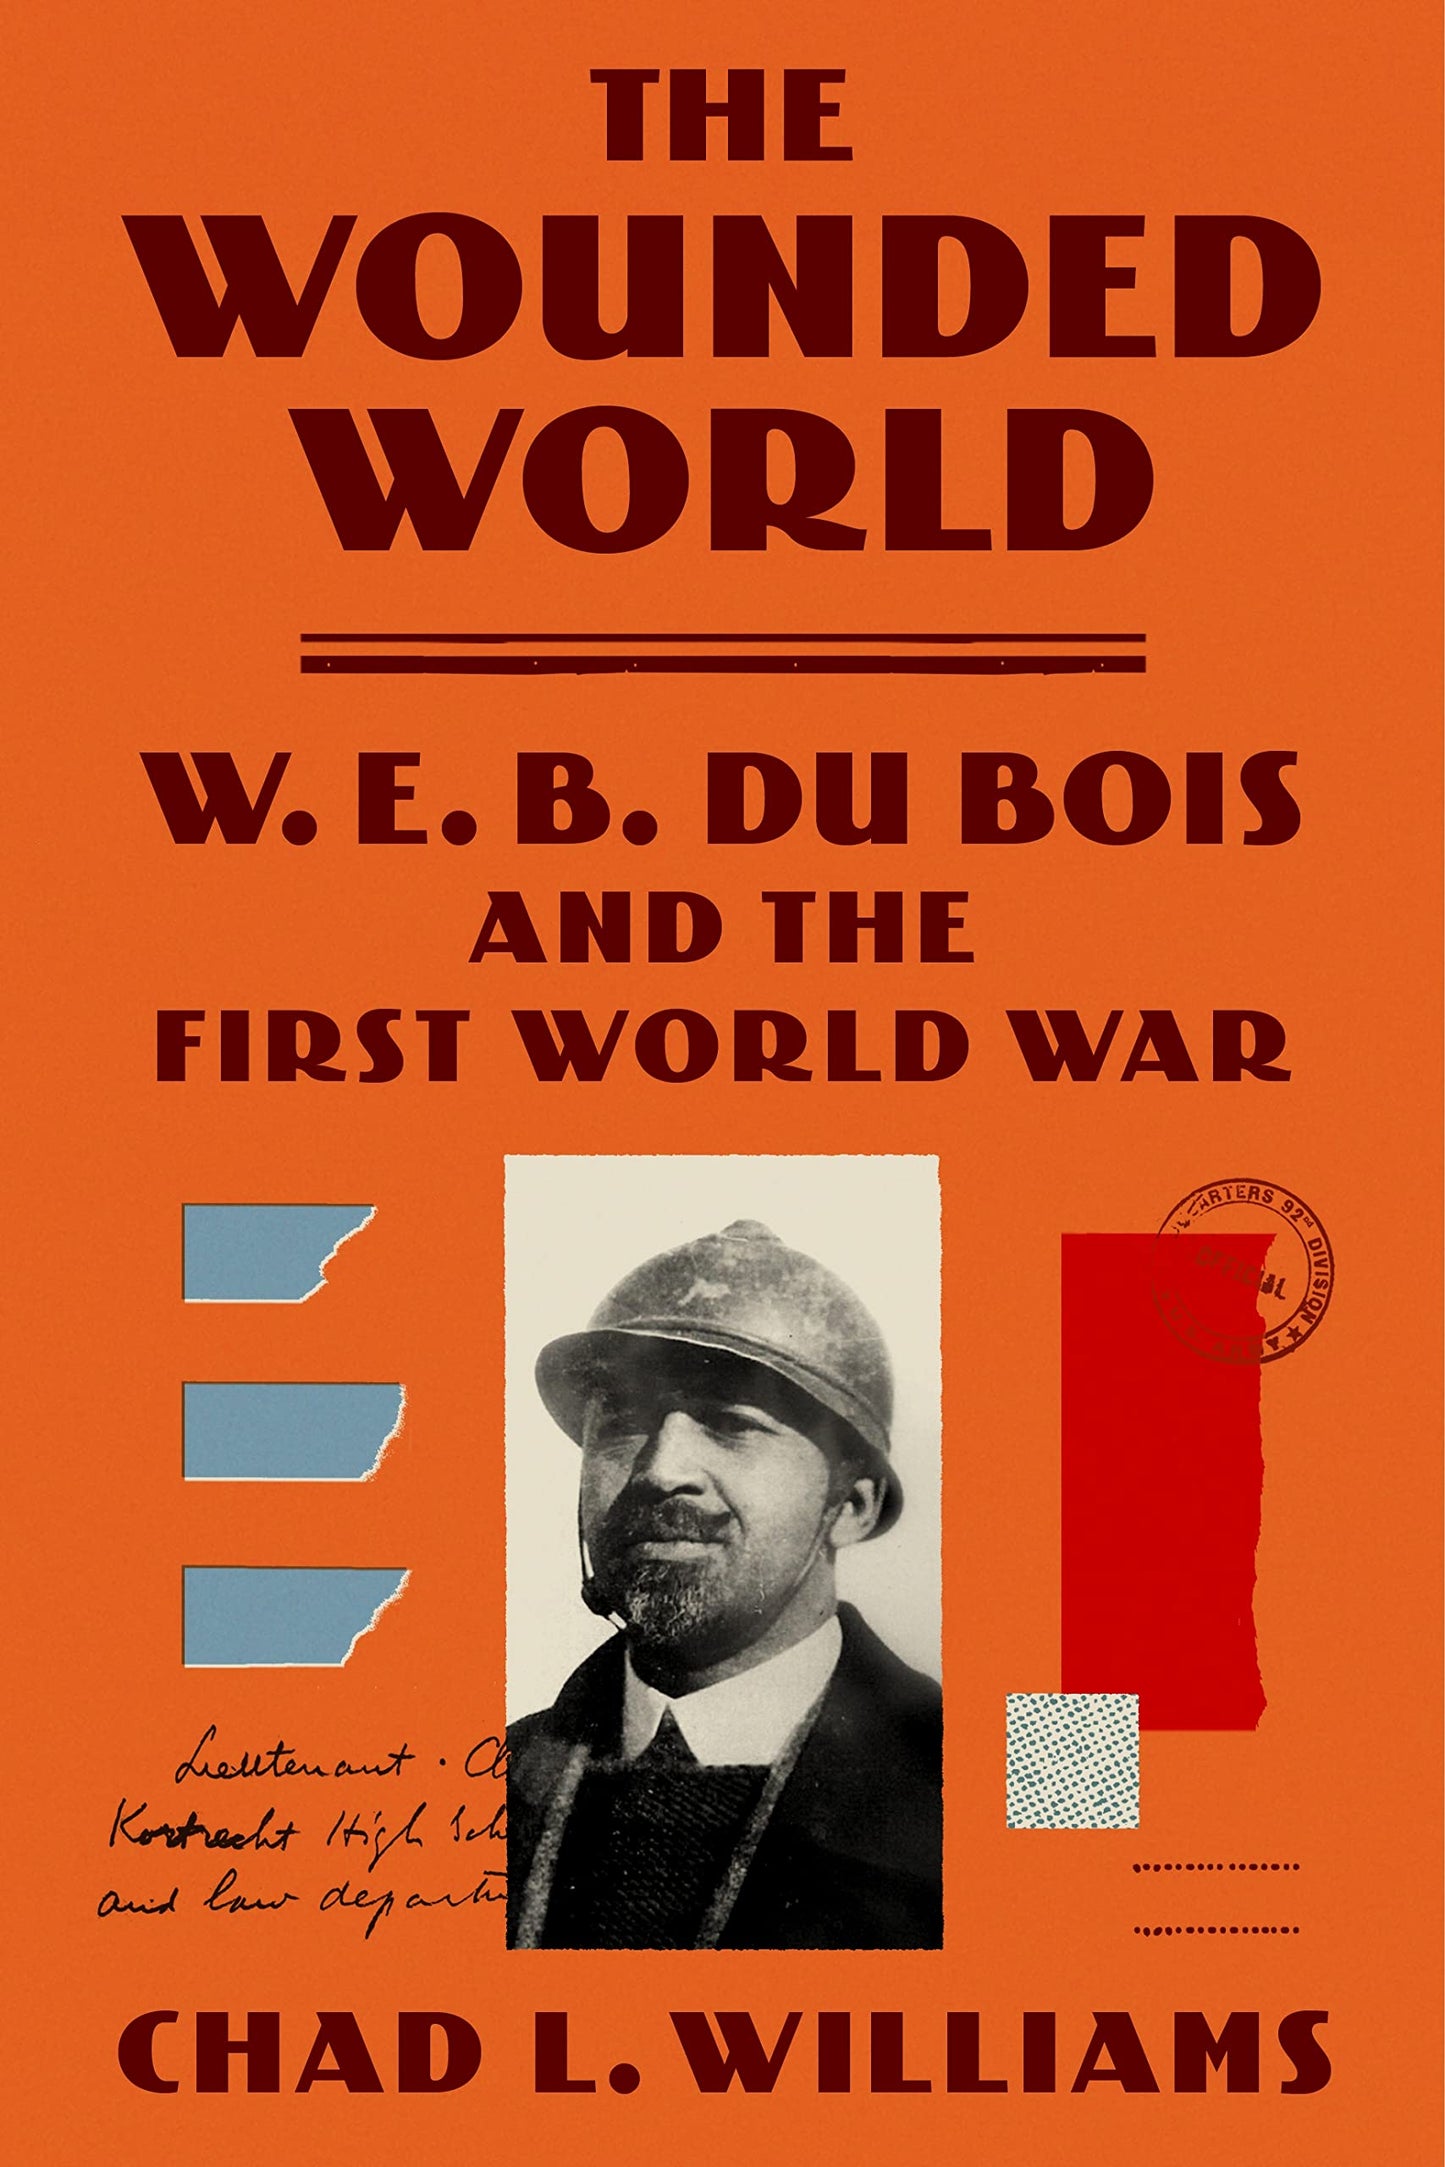 The Wounded World // W. E. B. Du Bois and the First World War